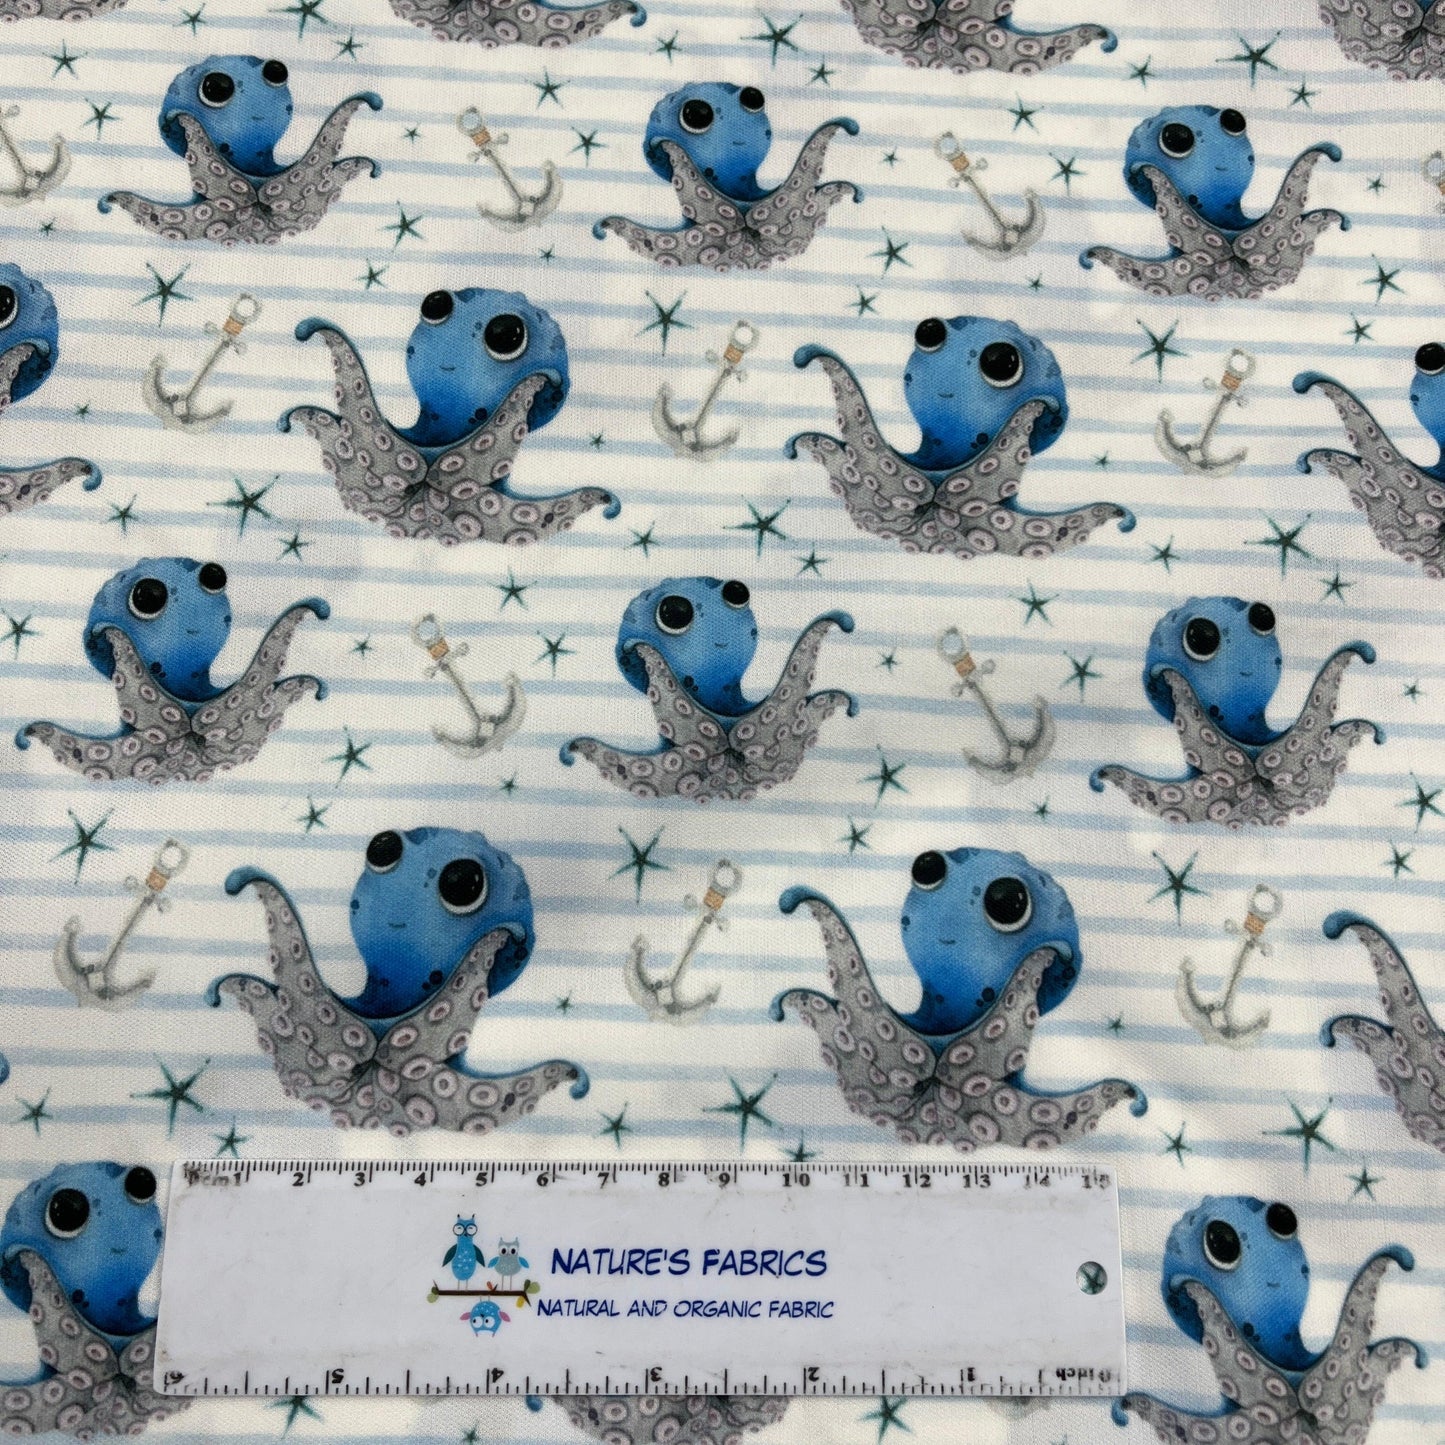 Baby Octopus 1 mil PUL Fabric - Made in the USA - Nature's Fabrics